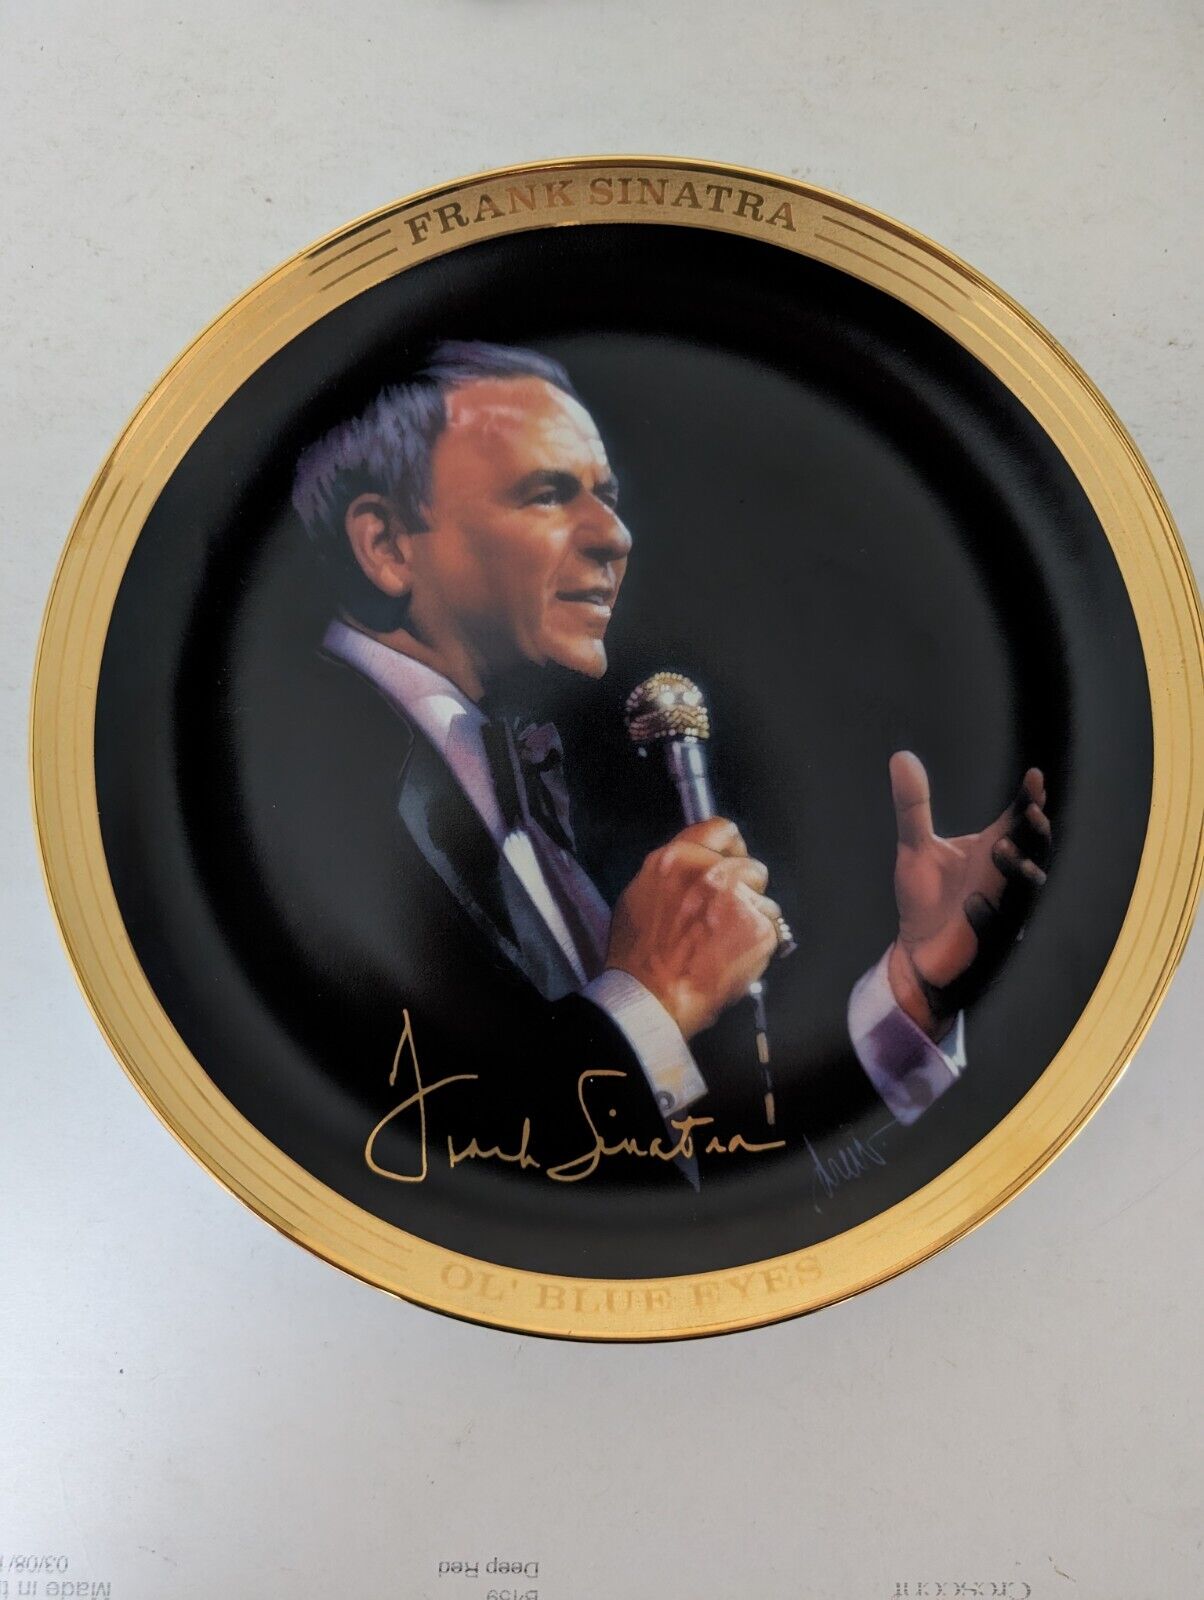 Frank Sinatra Franklin Mint Limited Edition Musical Plate Plays My Way